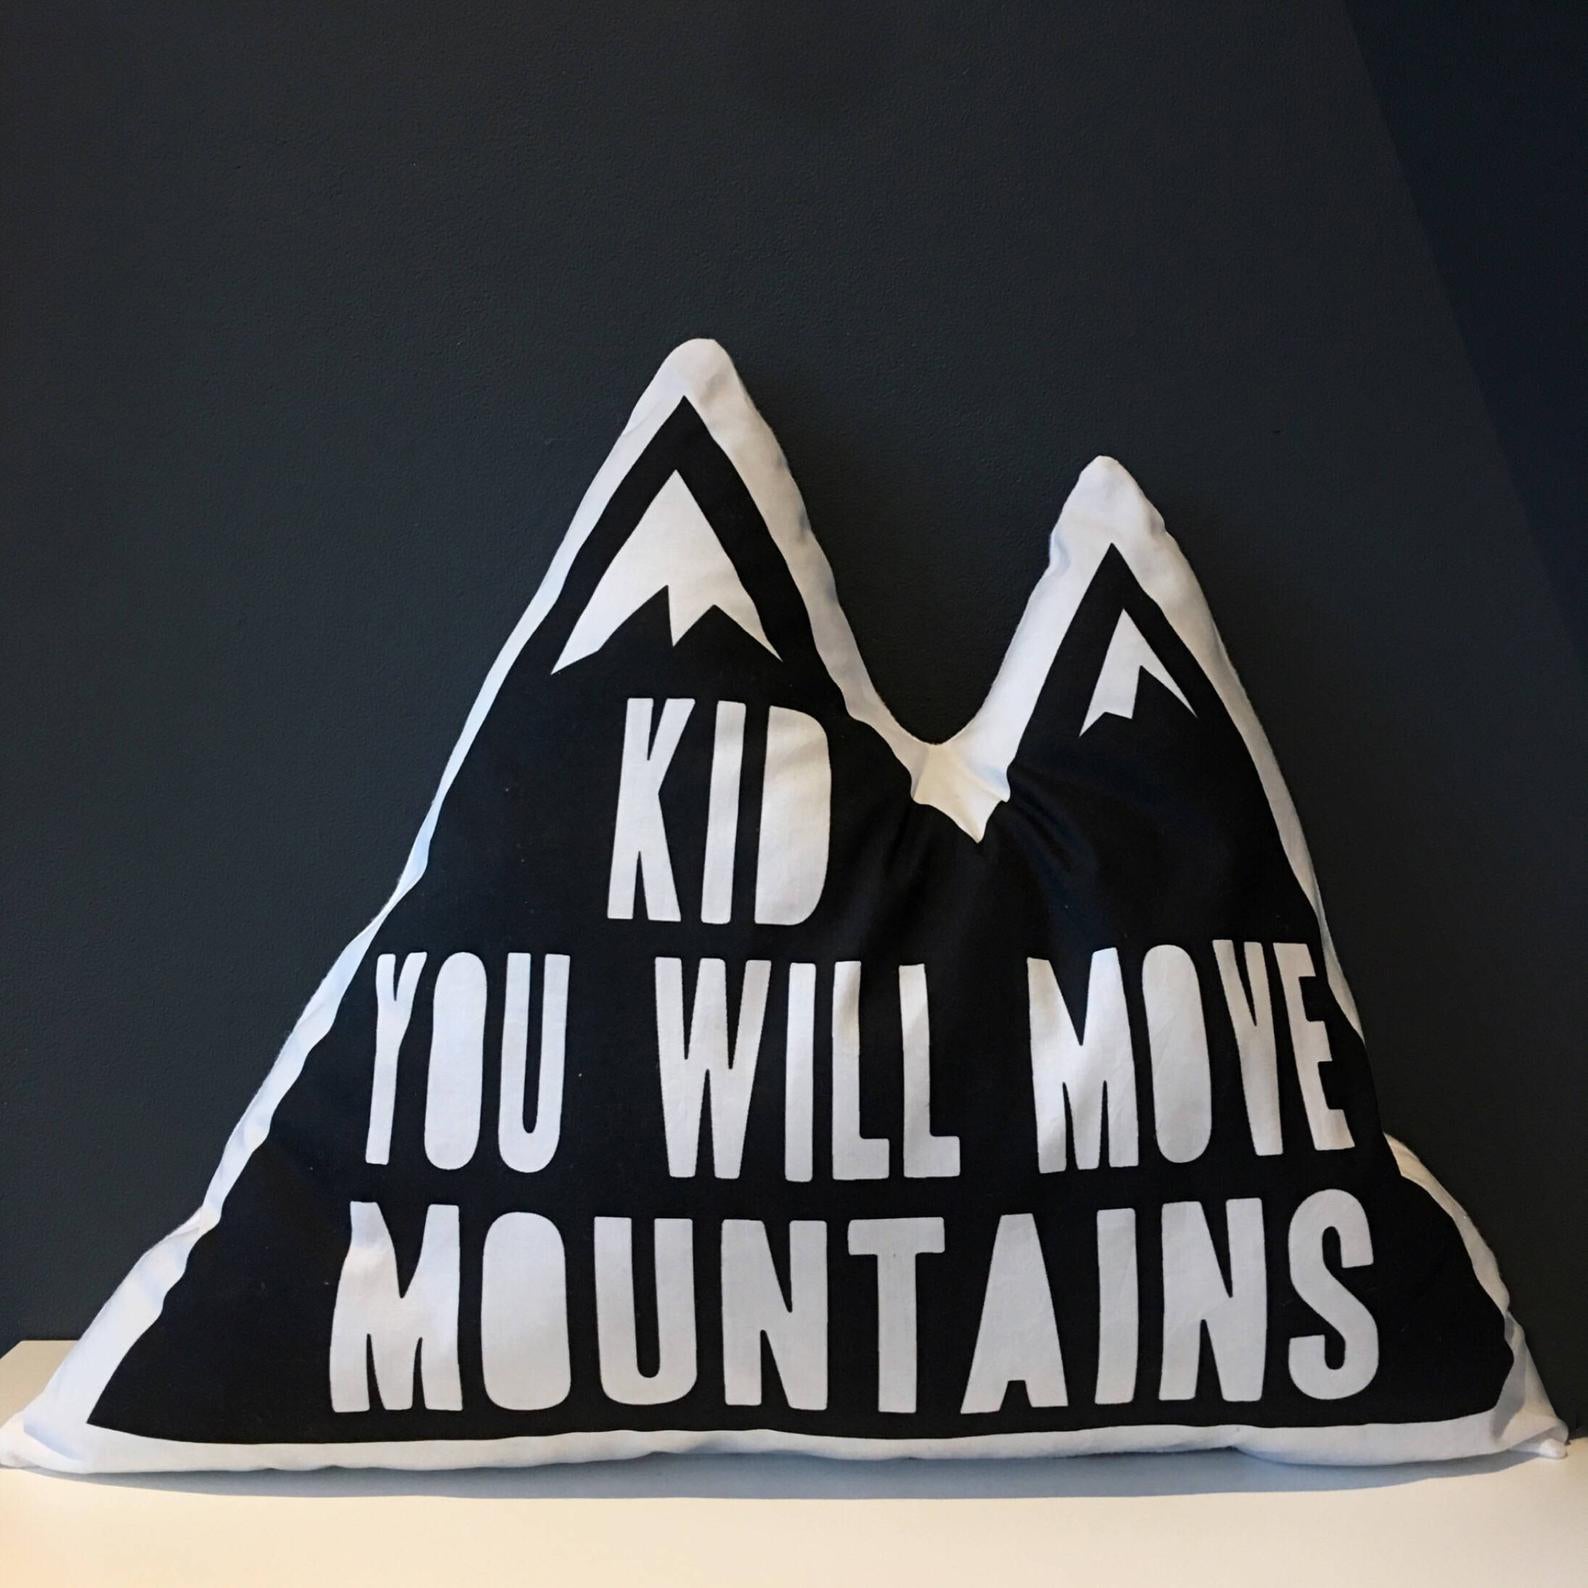 A decorative pillow featuring the inspiring message "kid you will move mountains".